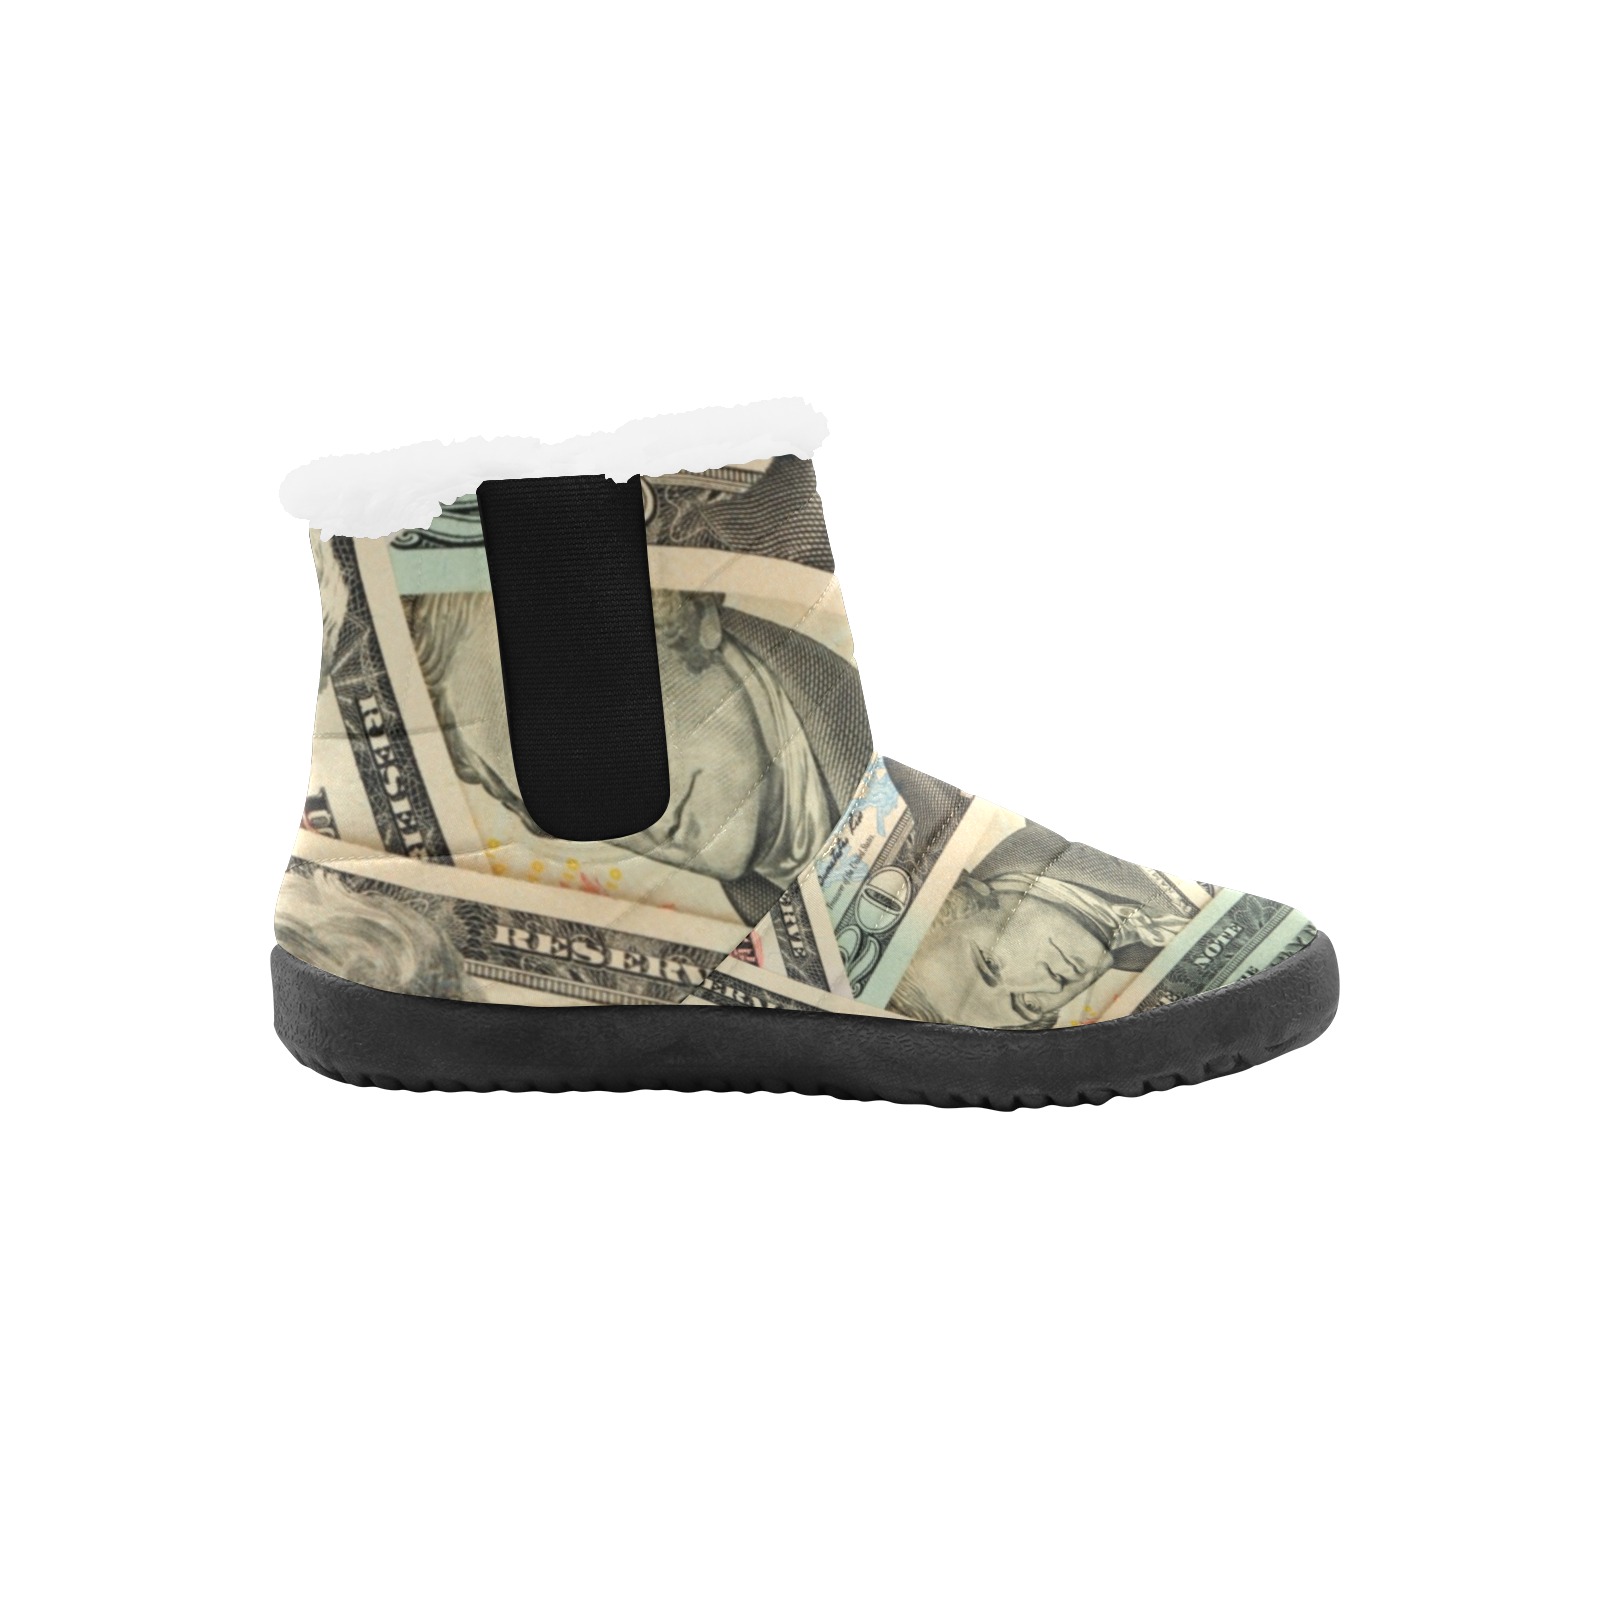 US PAPER CURRENCY Women's Cotton-Padded Shoes (Model 19291)